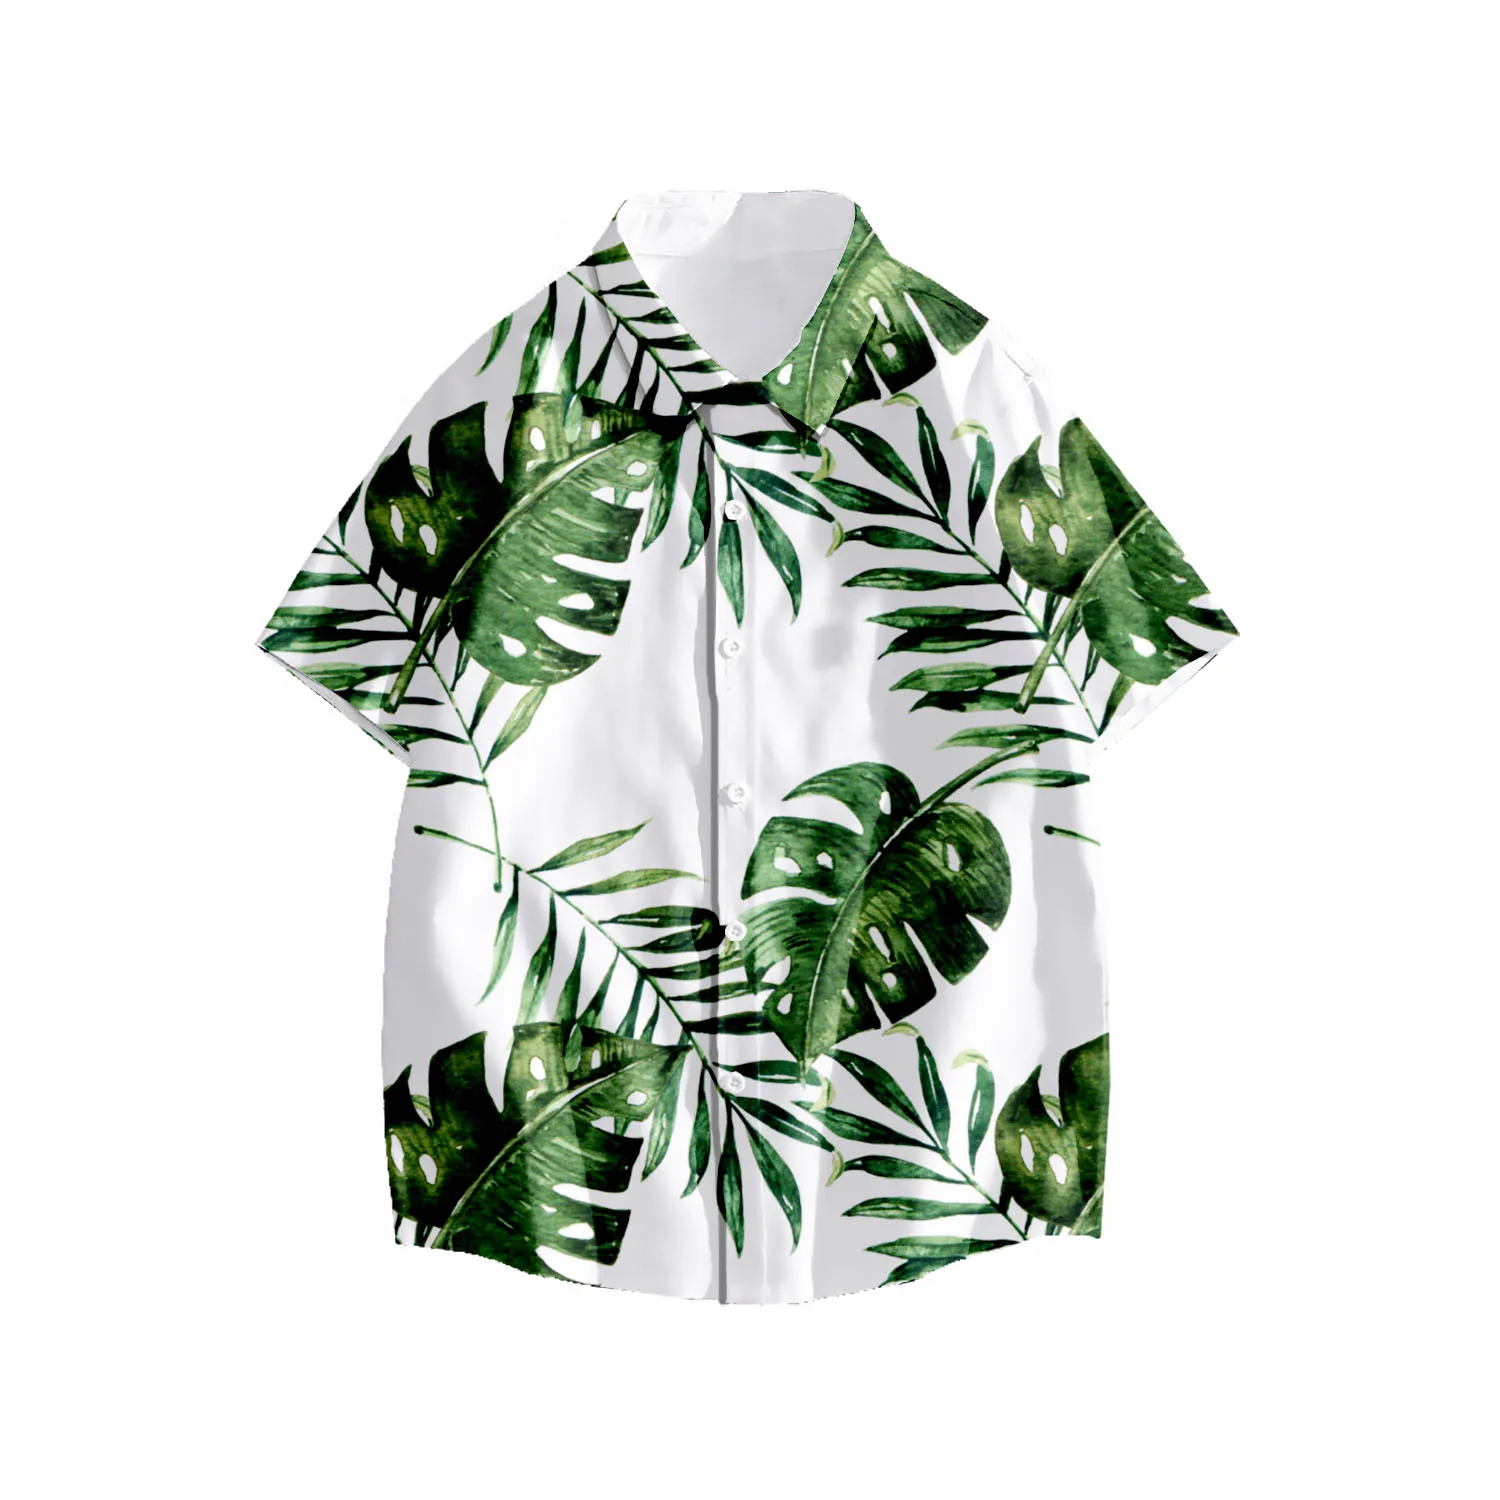 

LIASOSO 2021 New Fashion Trend Beach Surfing Style Shirt Japanese Ink Style Bamboo Painting Special Custom Shirt